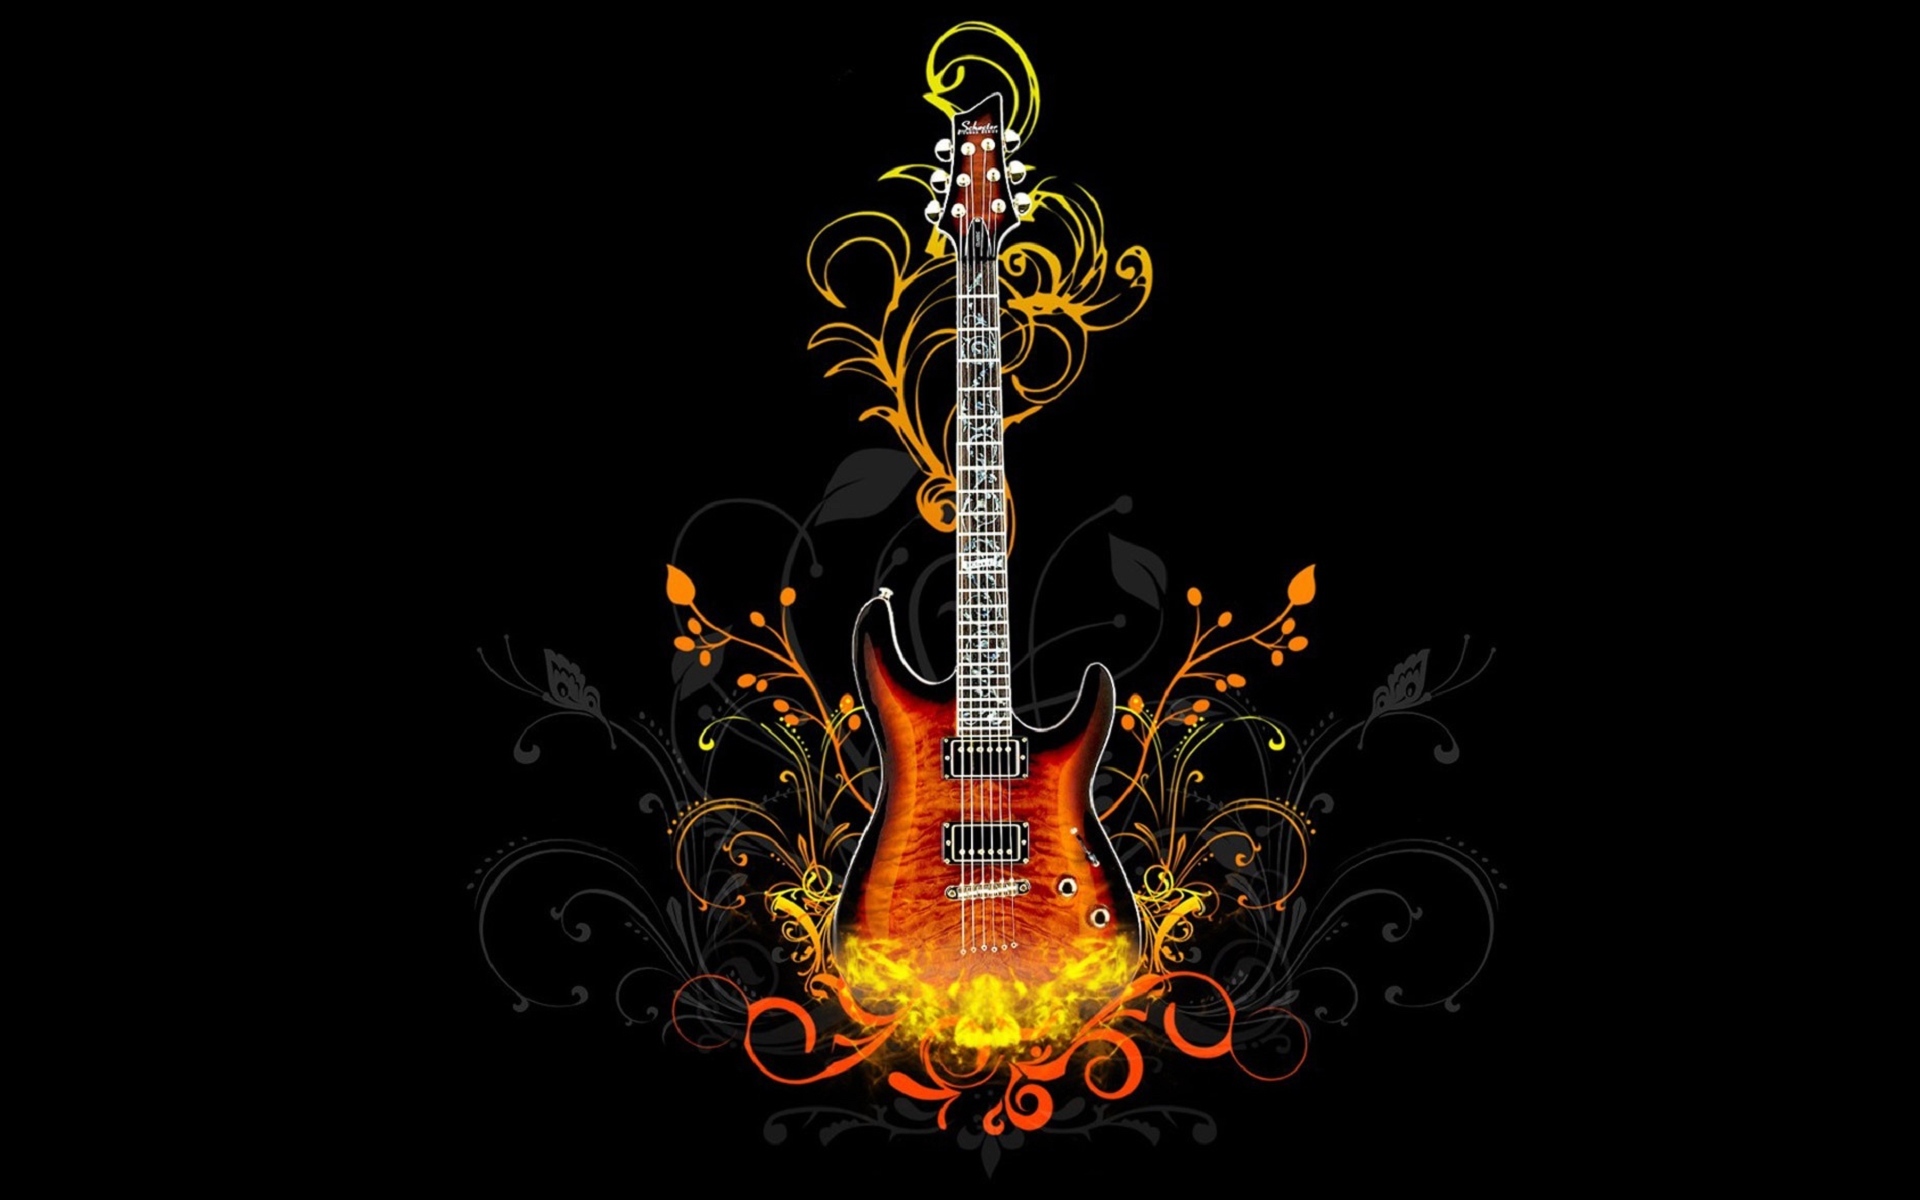 pictures, black, guitars, tools, music High Definition image